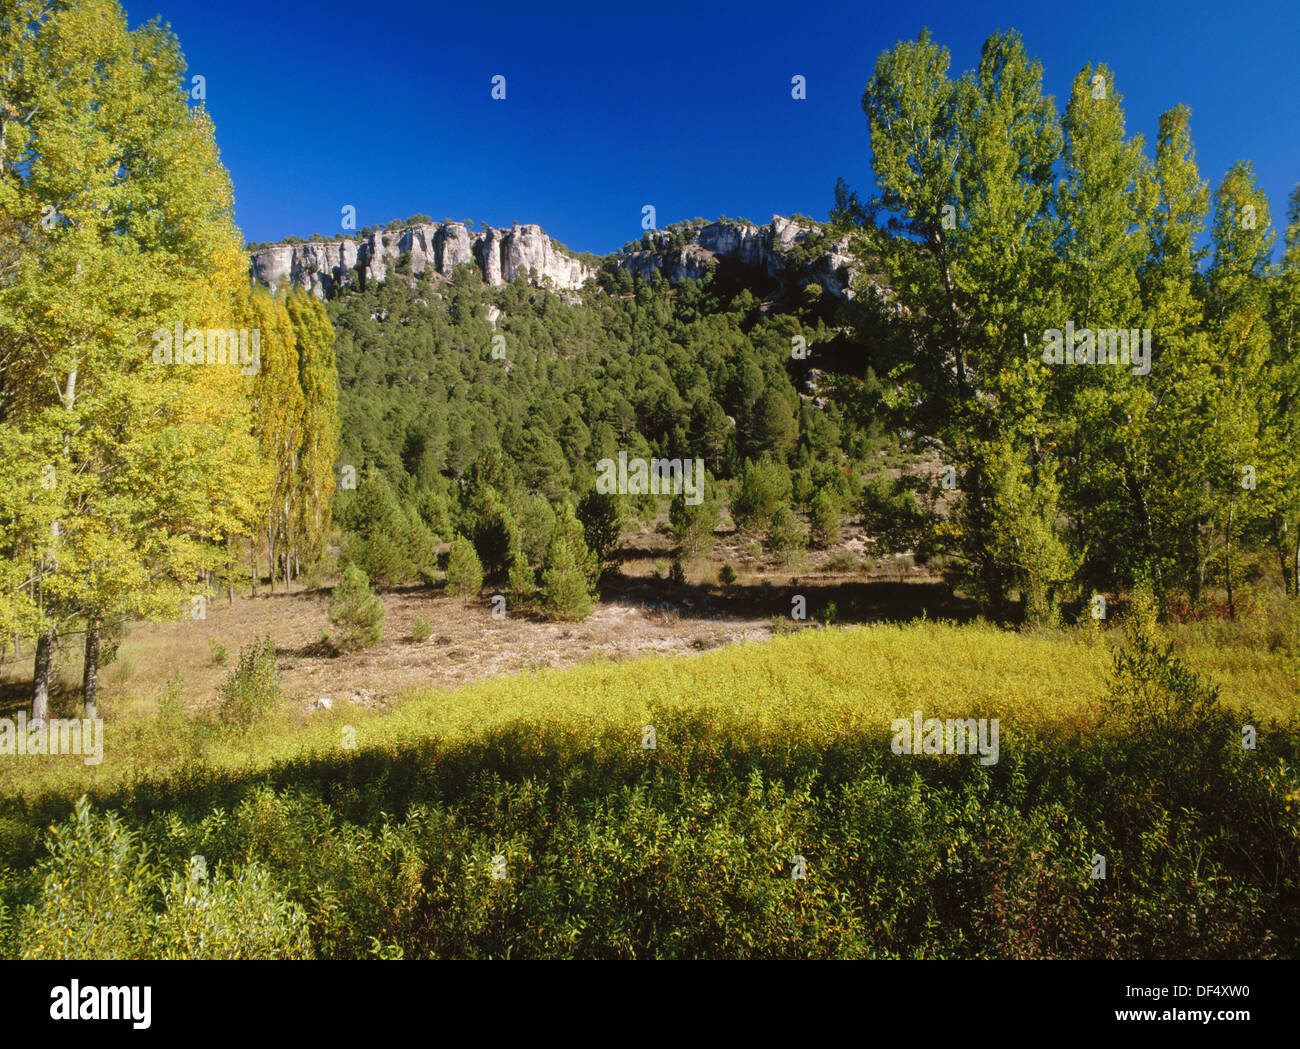 Page 2 - Canizares High Resolution Stock Photography and Images - Alamy